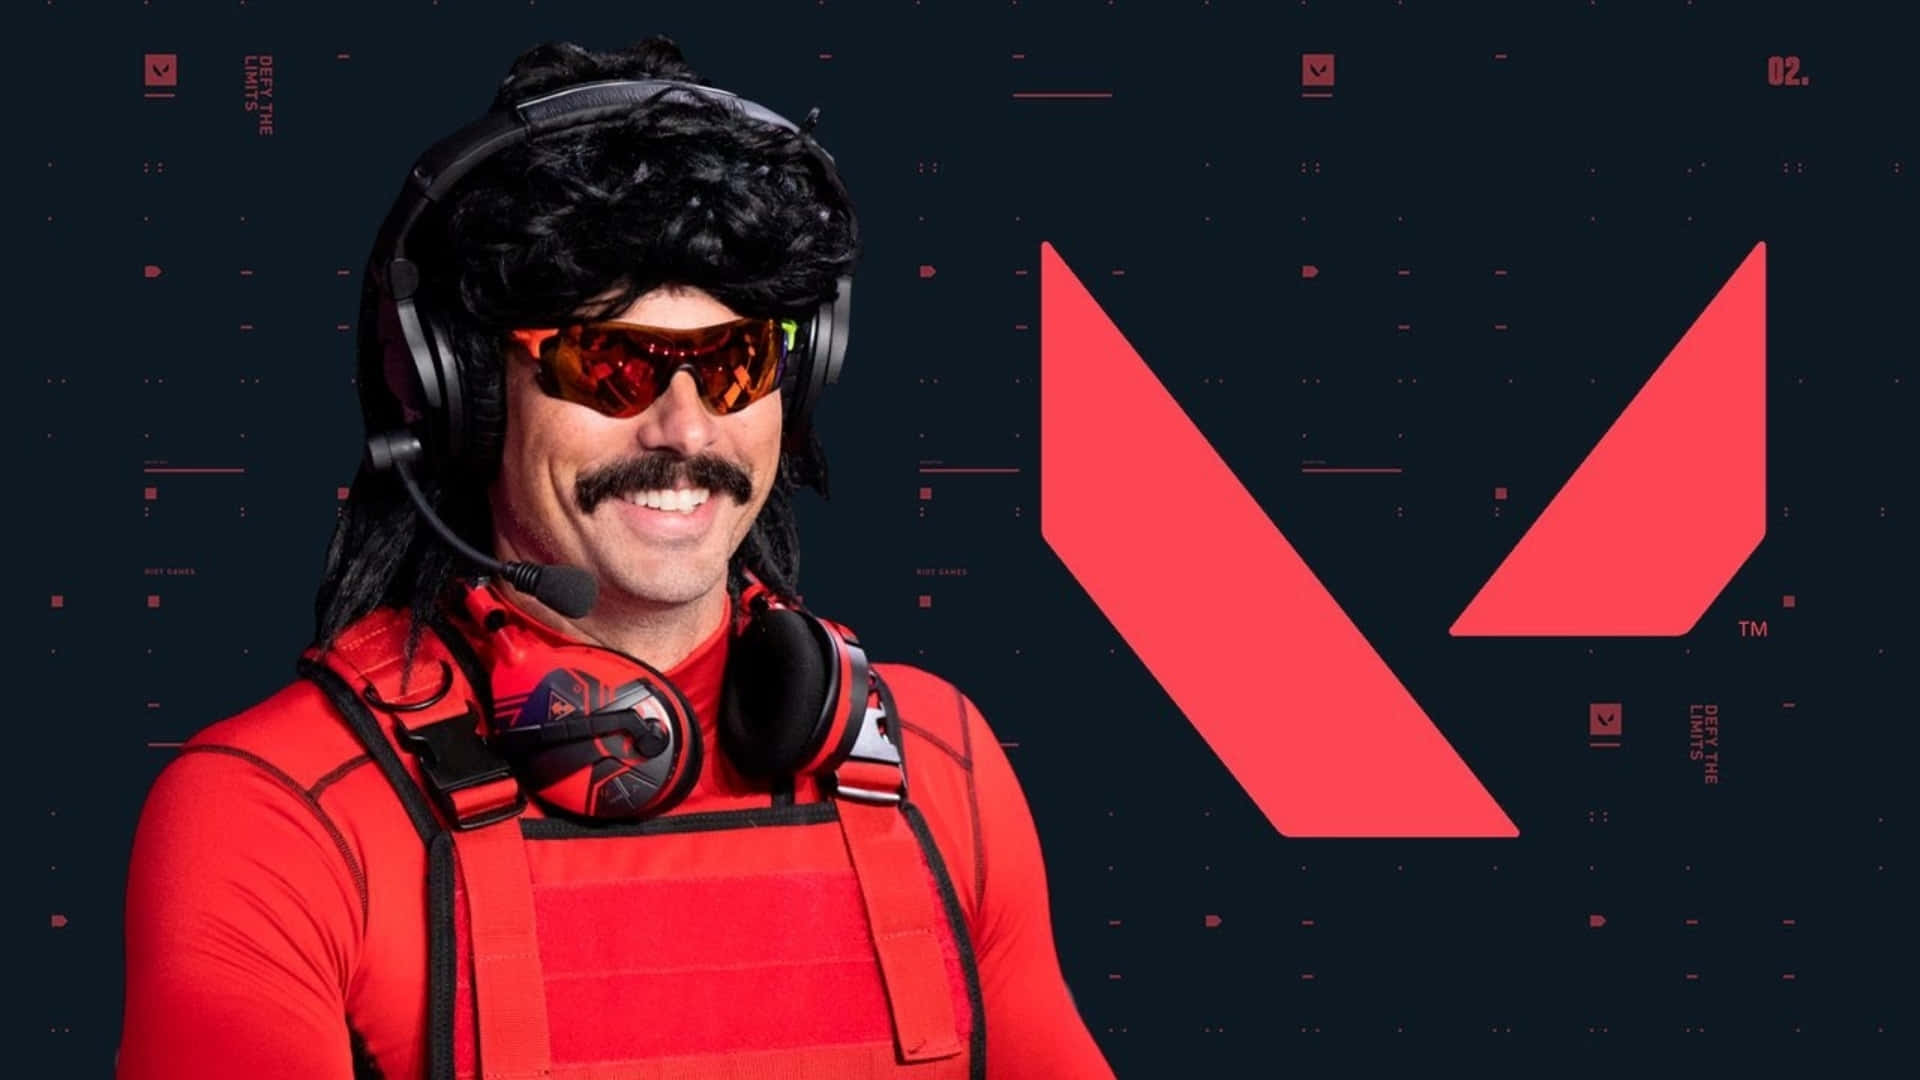 Dr Disrespect With Valorant Logo Wallpaper